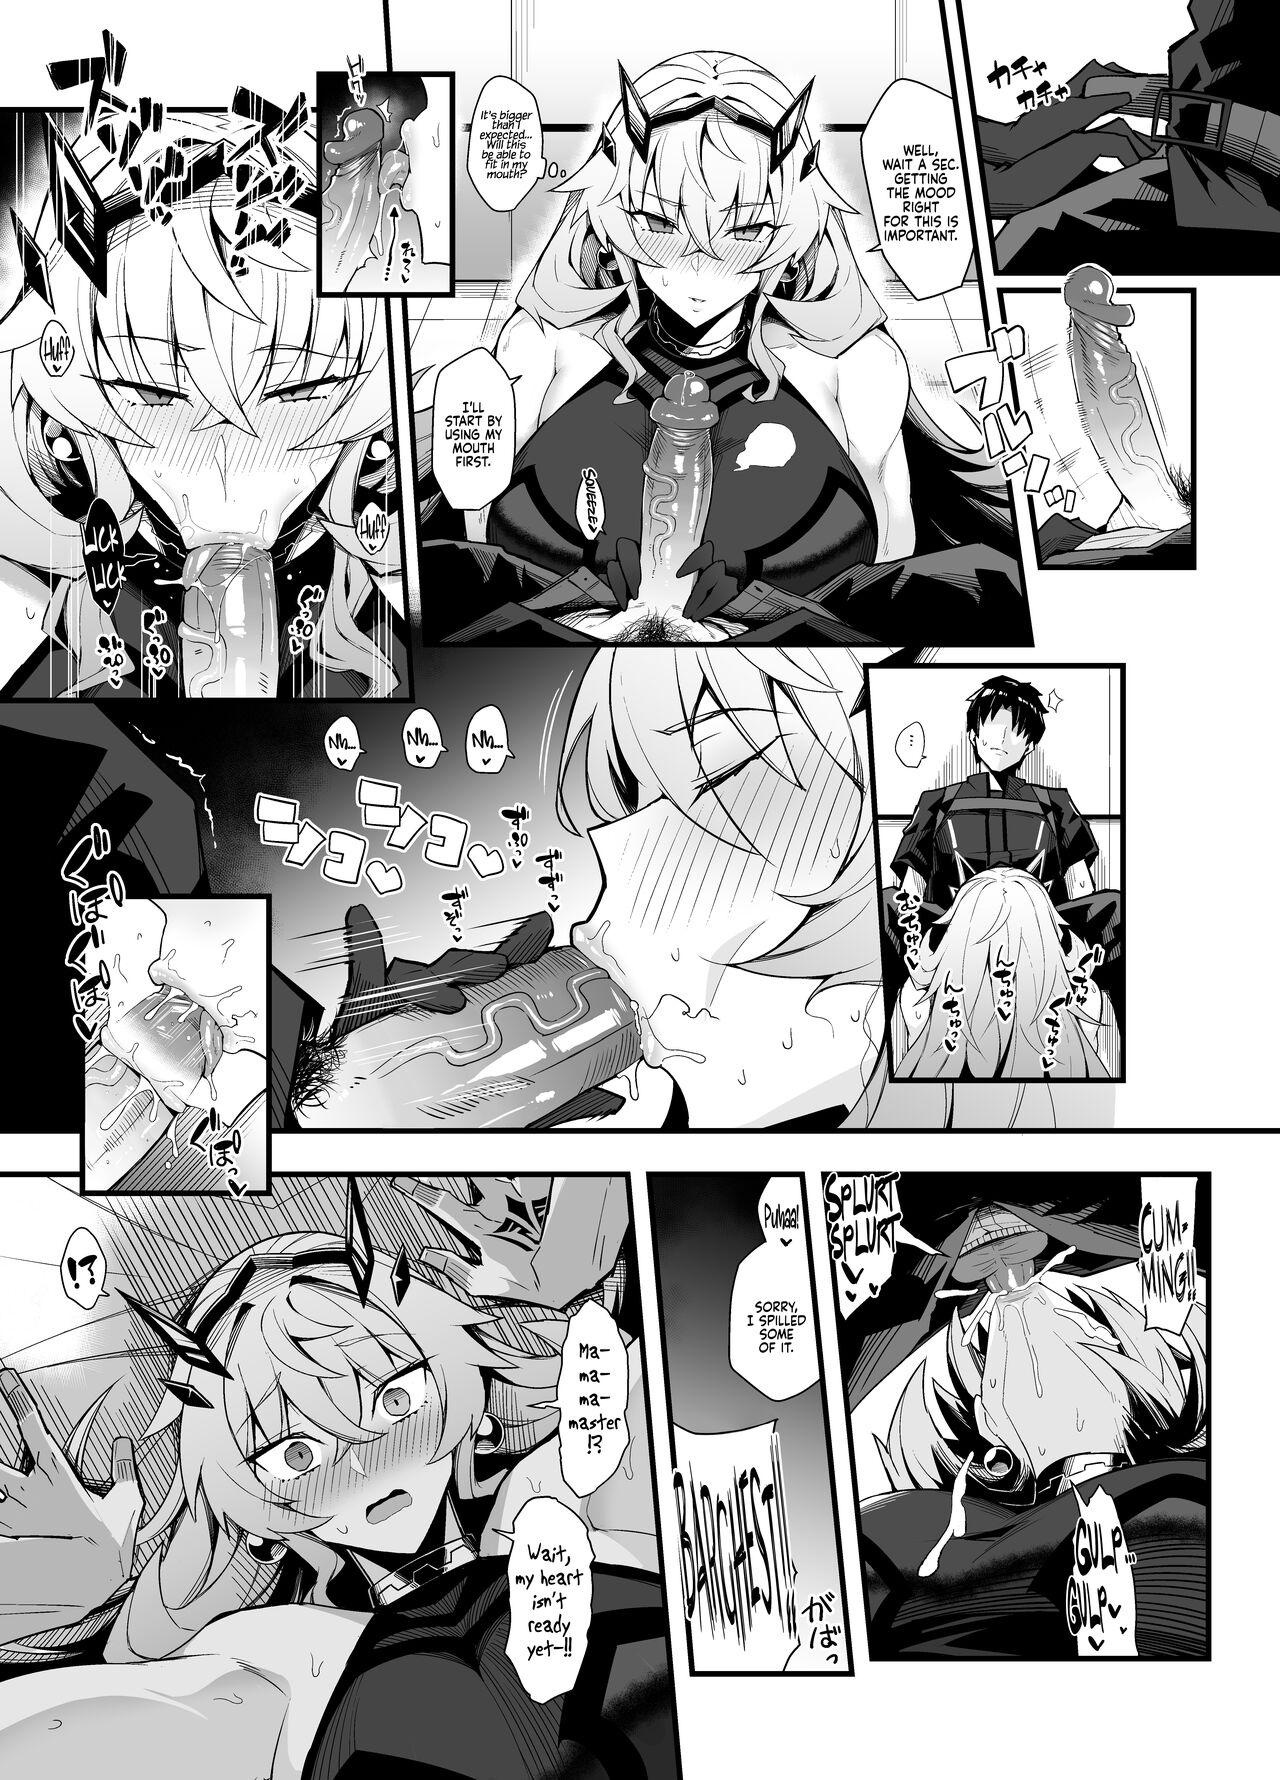 Tanga Bageko to Asa made Ichaicha | Making out with Bageko Until Morning - Fate grand order Mms - Page 3